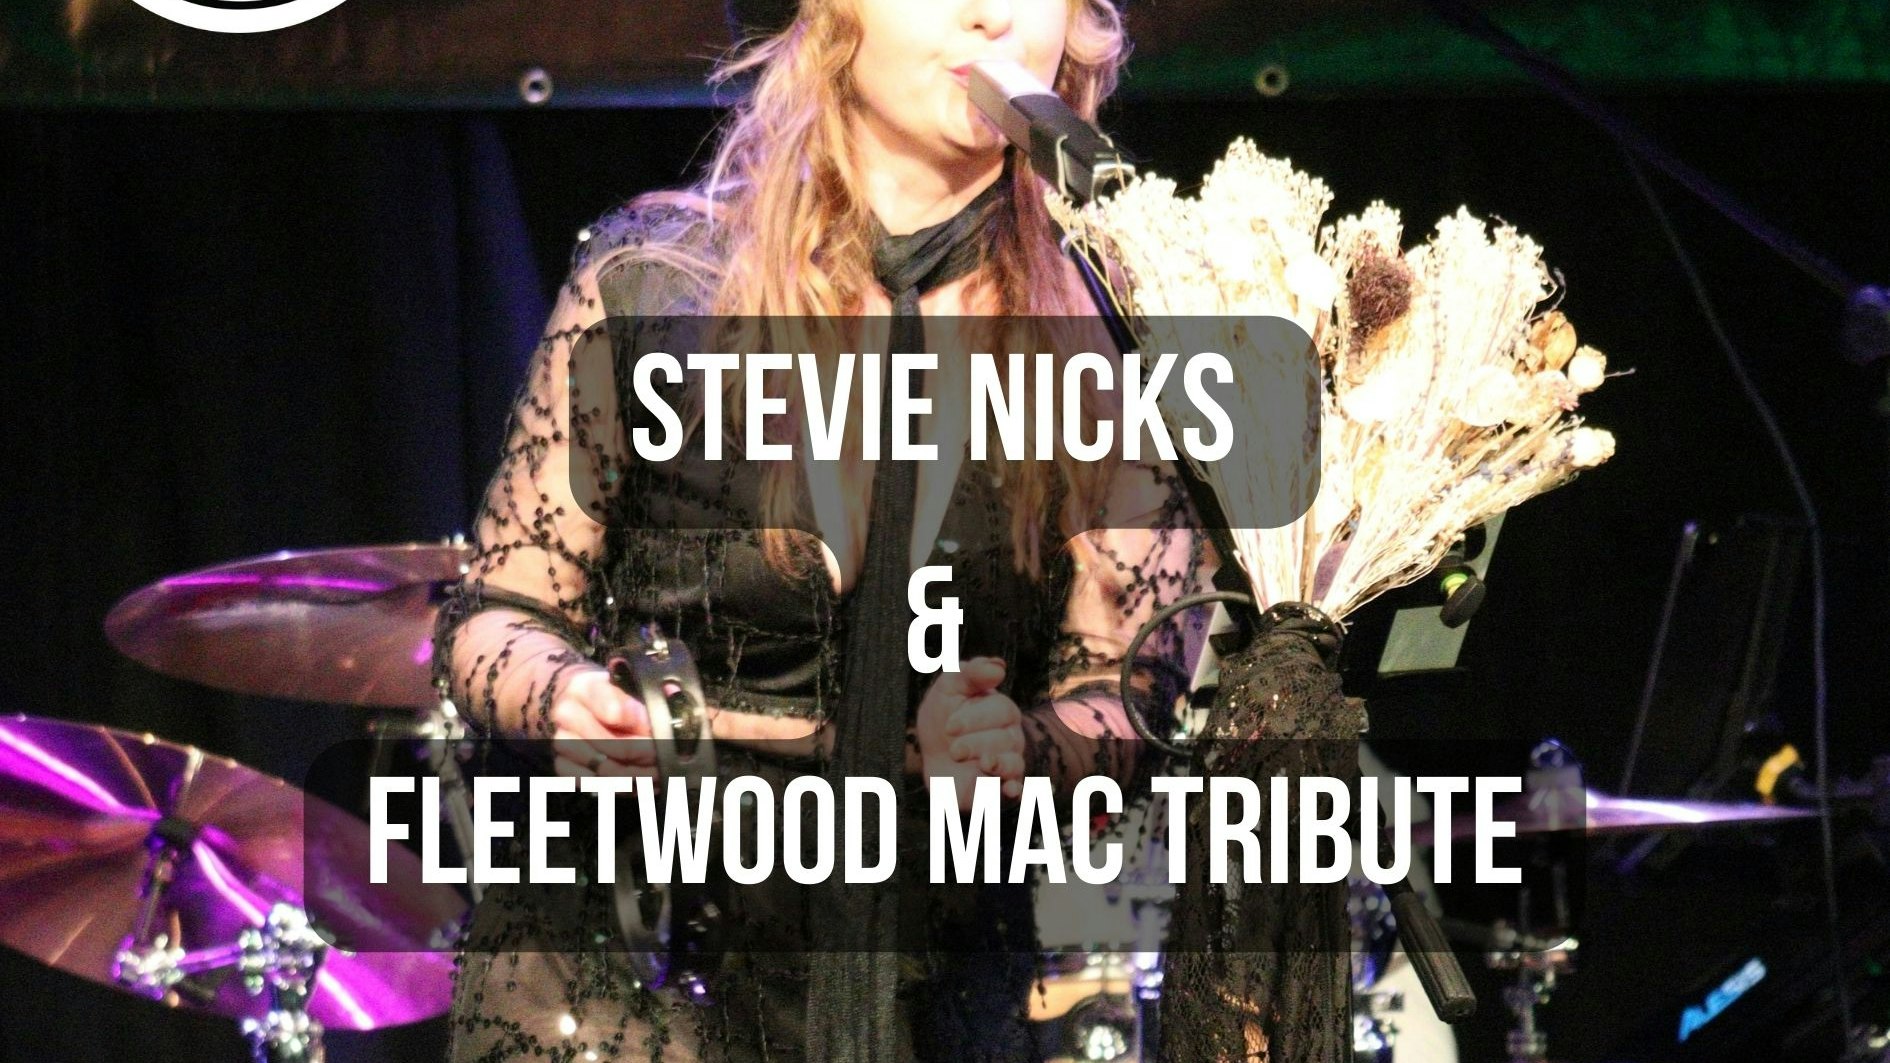 Go Your Own Way – Stevie Nicks and Fleetwood Mac Tribute